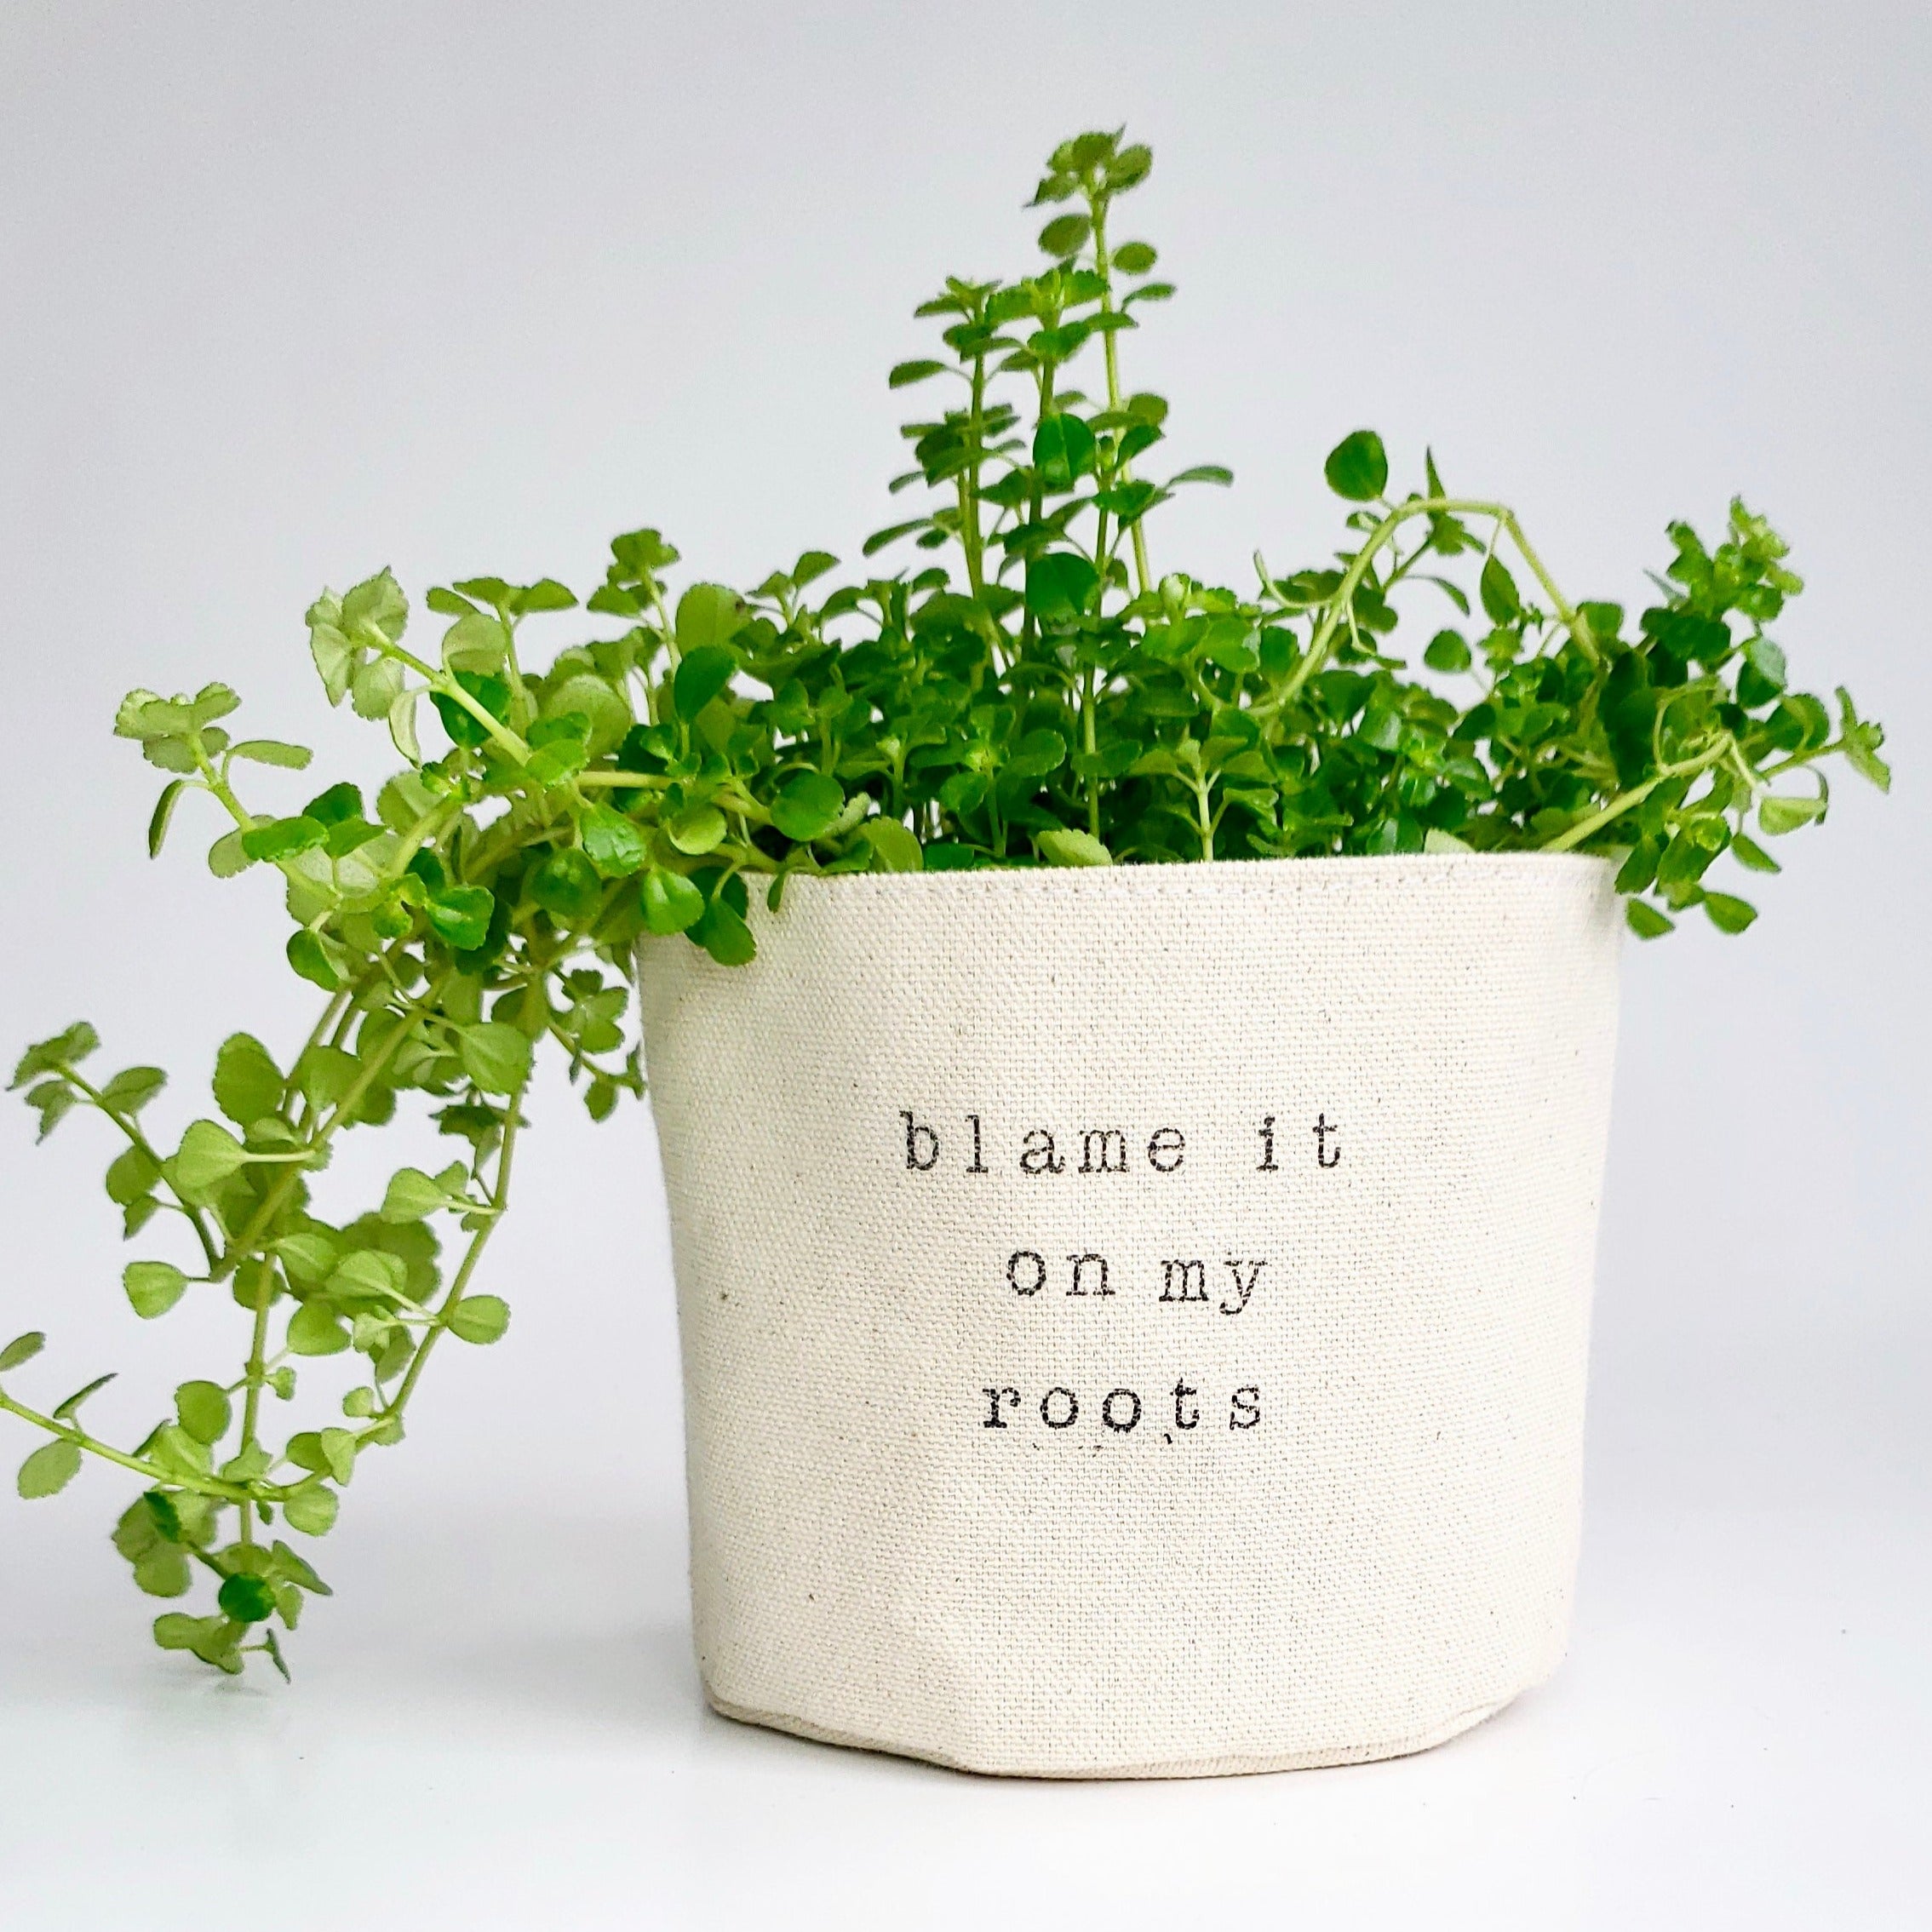 Blame it On My Roots Planter